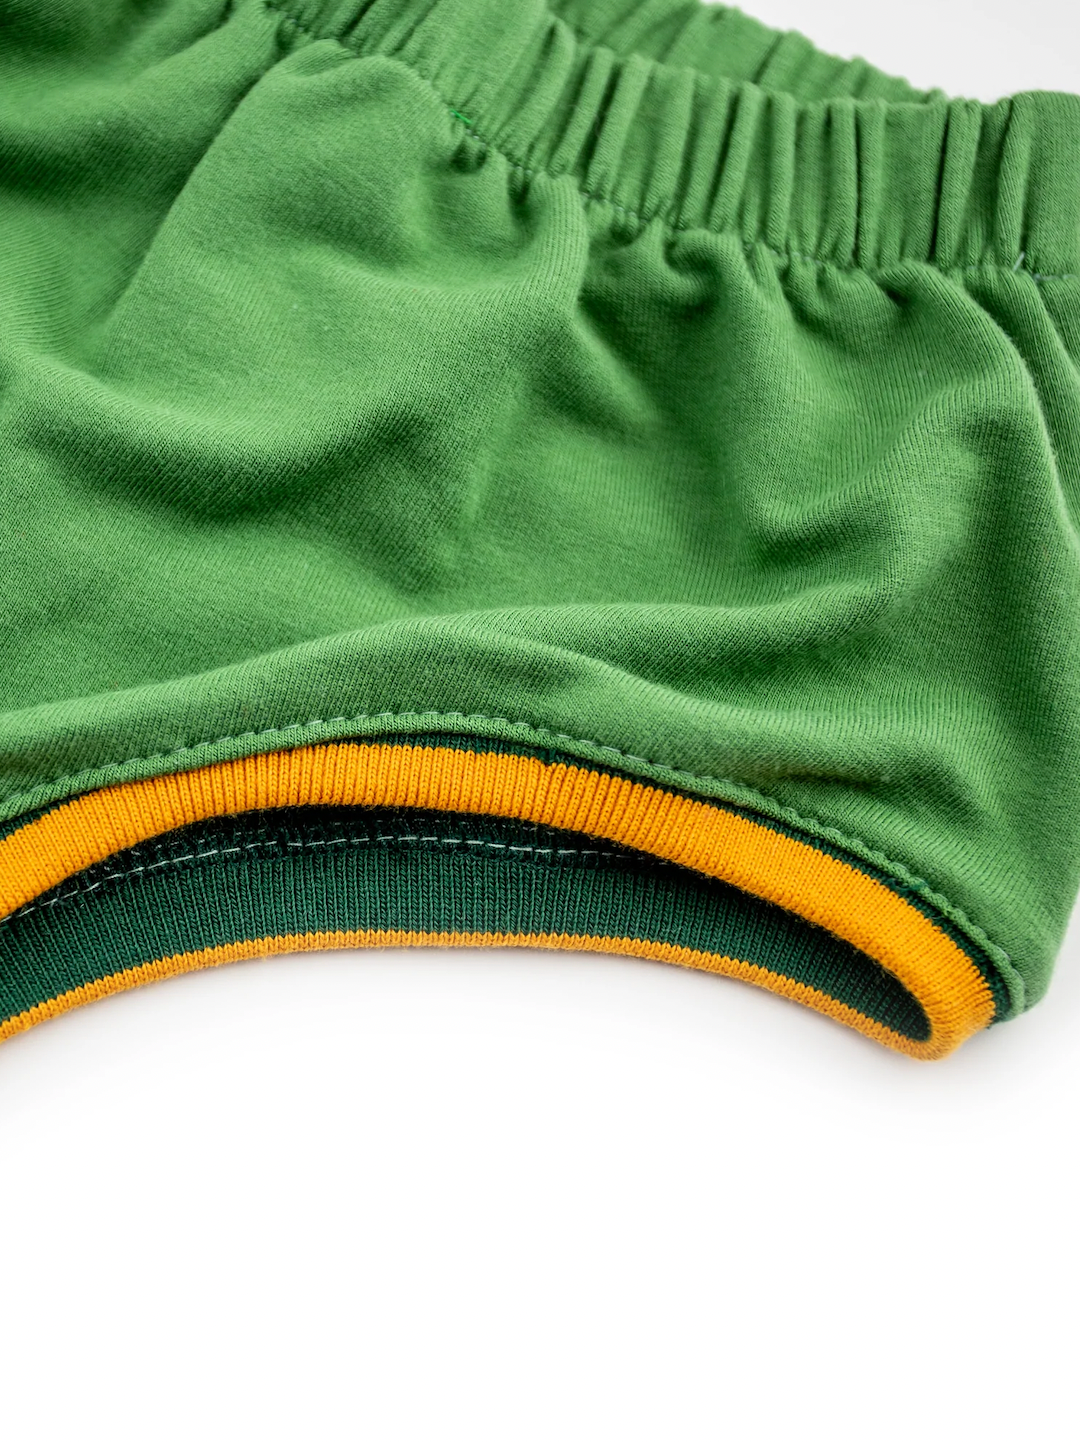 Detail of yellow trim at leg hole of mint green kids' bloomers